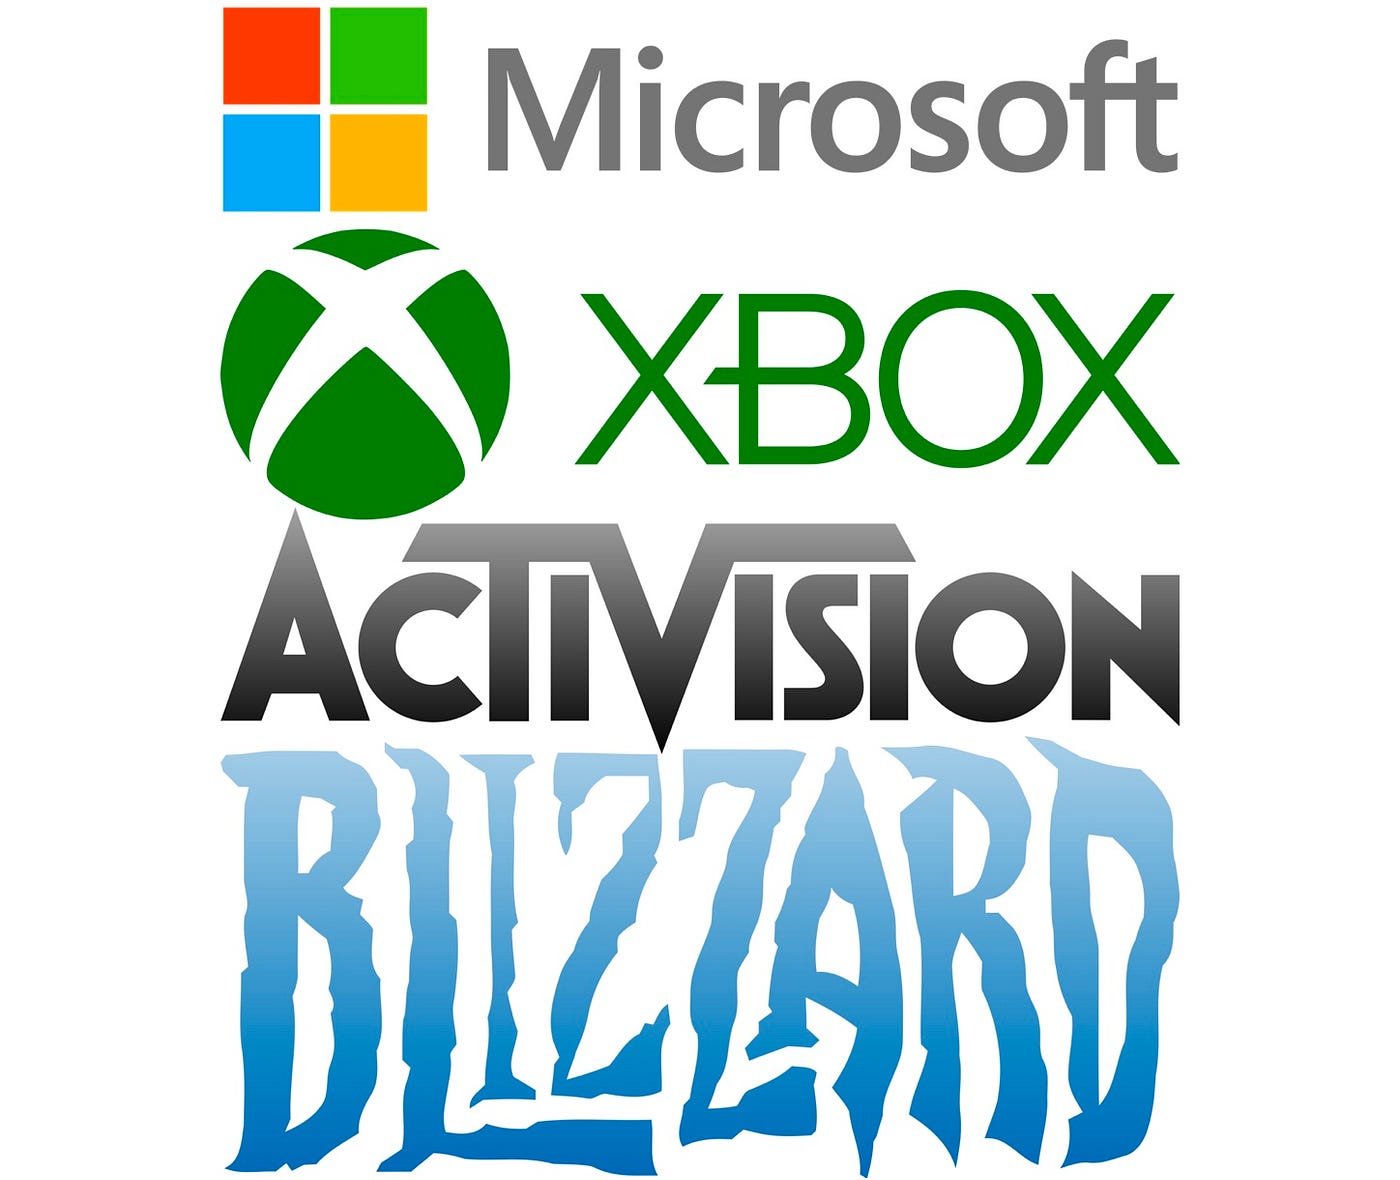 The problem with the Microsoft-Activision Blizzard merger